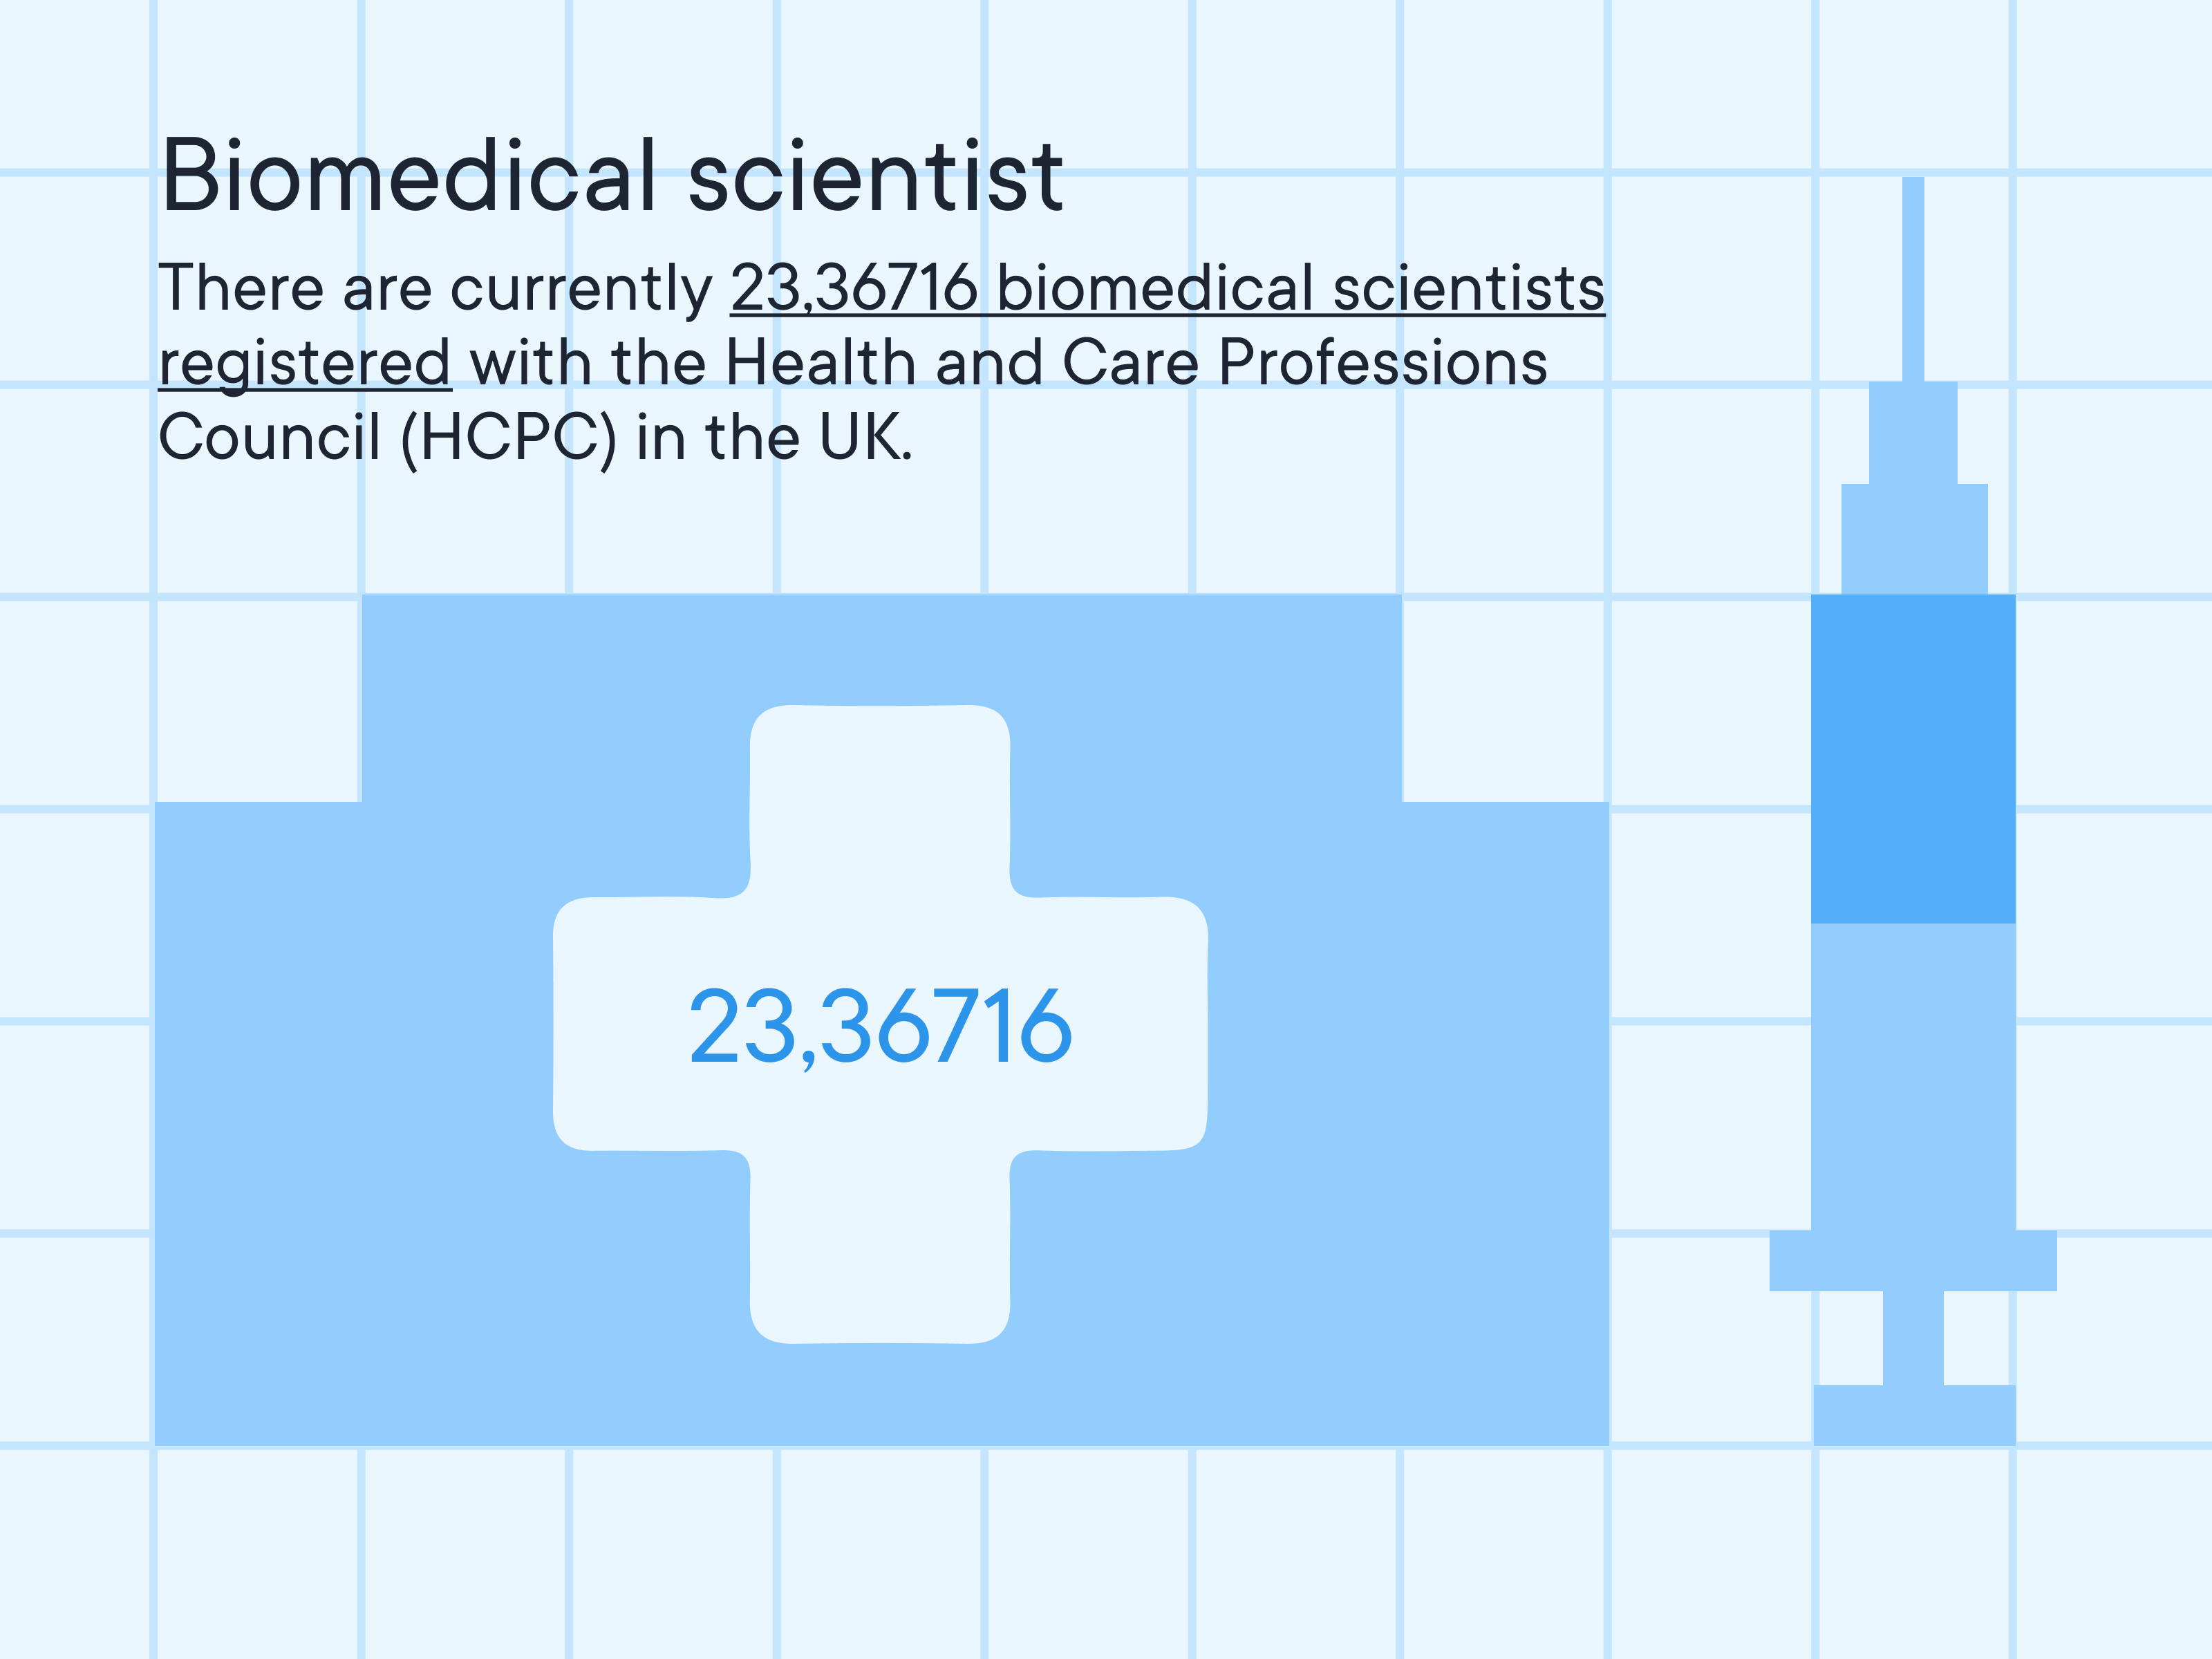 Number of registered biomedical scientists in the UK